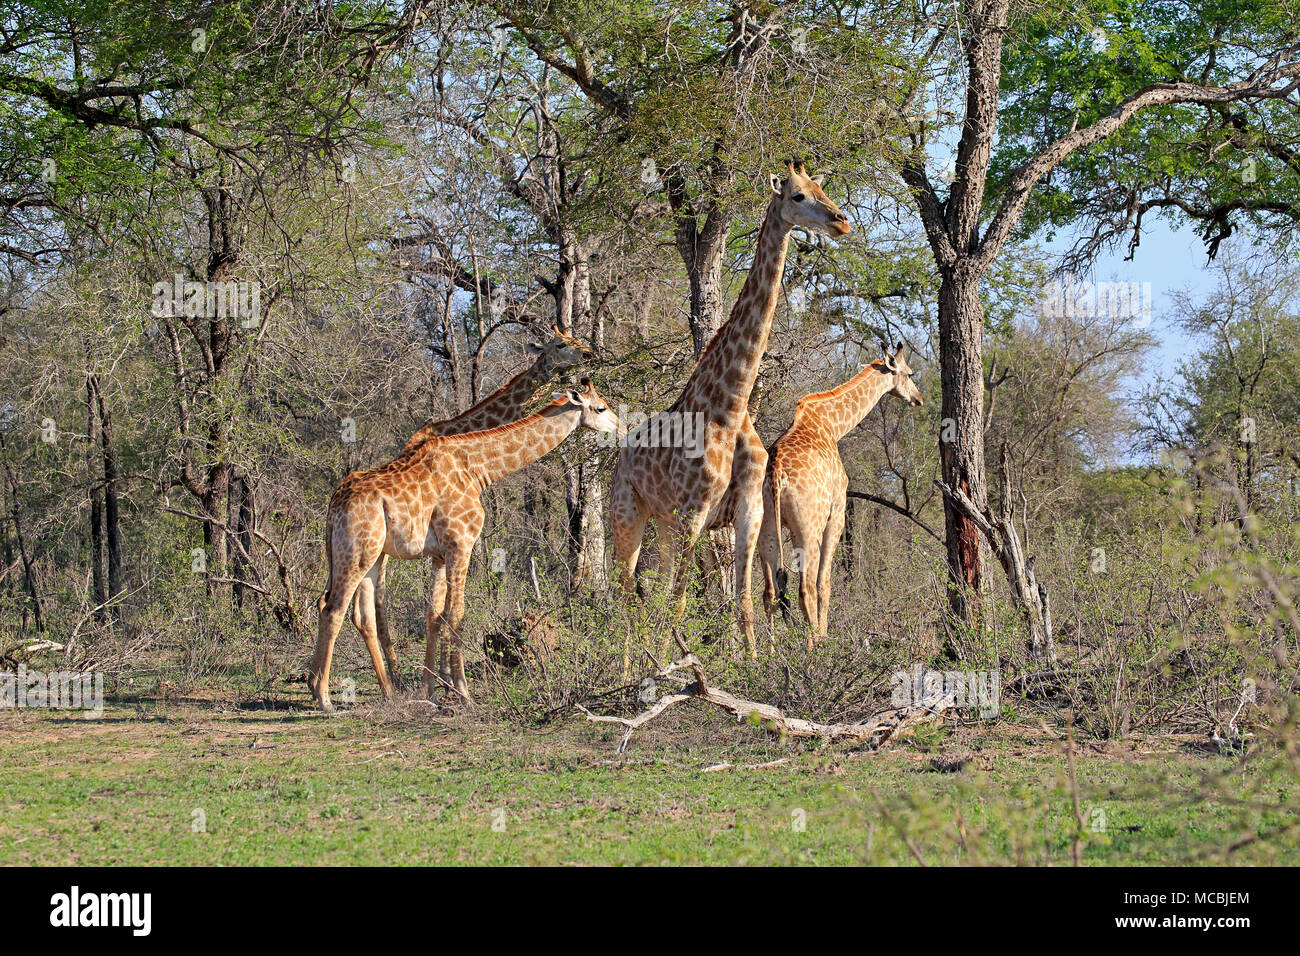 Southern giraffes (Giraffa camelopardalis giraffa), adult, group with young animal feeding, Kruger National Park, South Africa Stock Photo